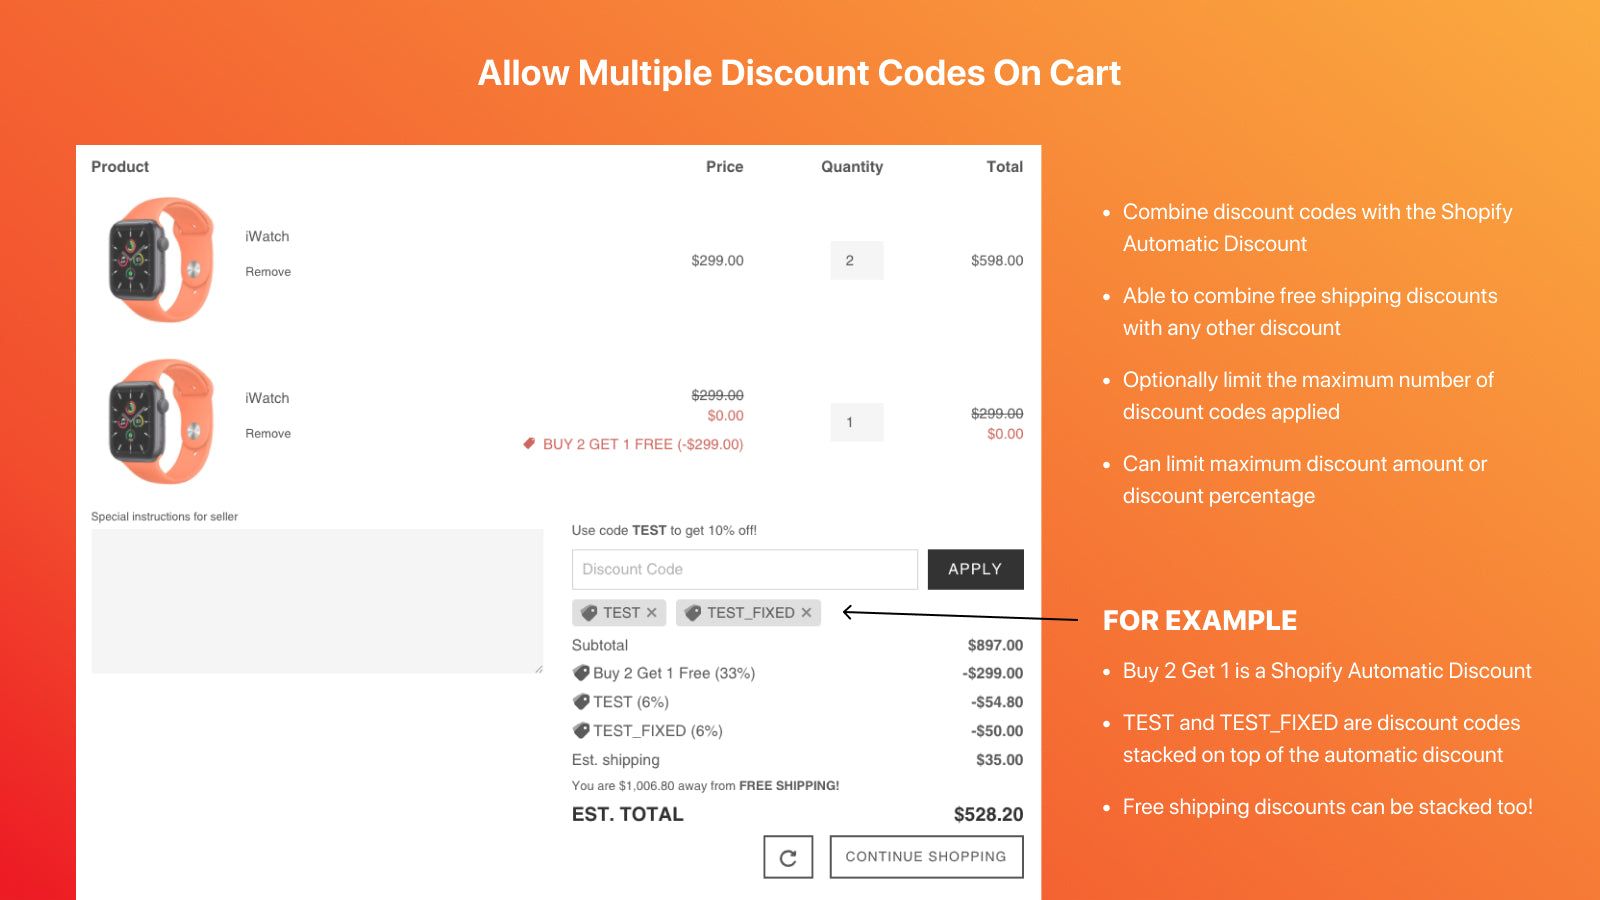 Stack Discount Codes On Cart + Multiple Automatic Discounts